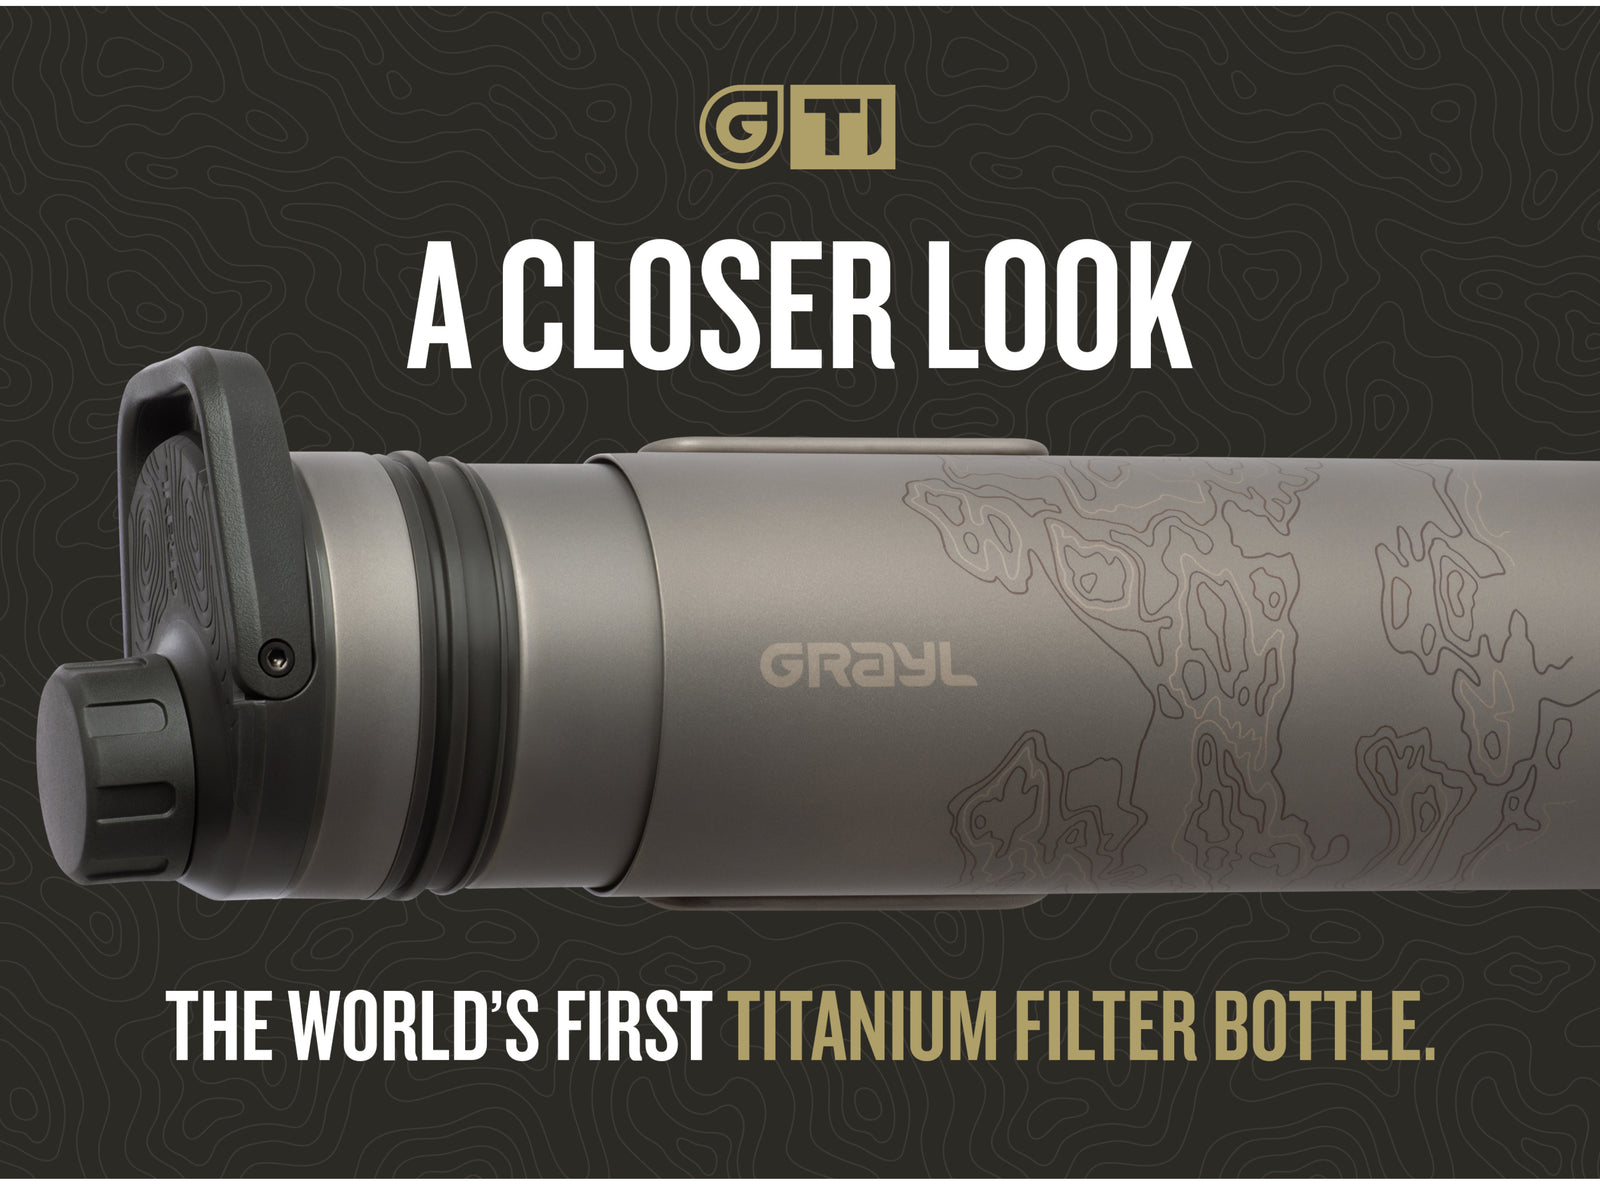 Take a deep dive into the parts that make up the UltraPress Titanium Filter Bottle.